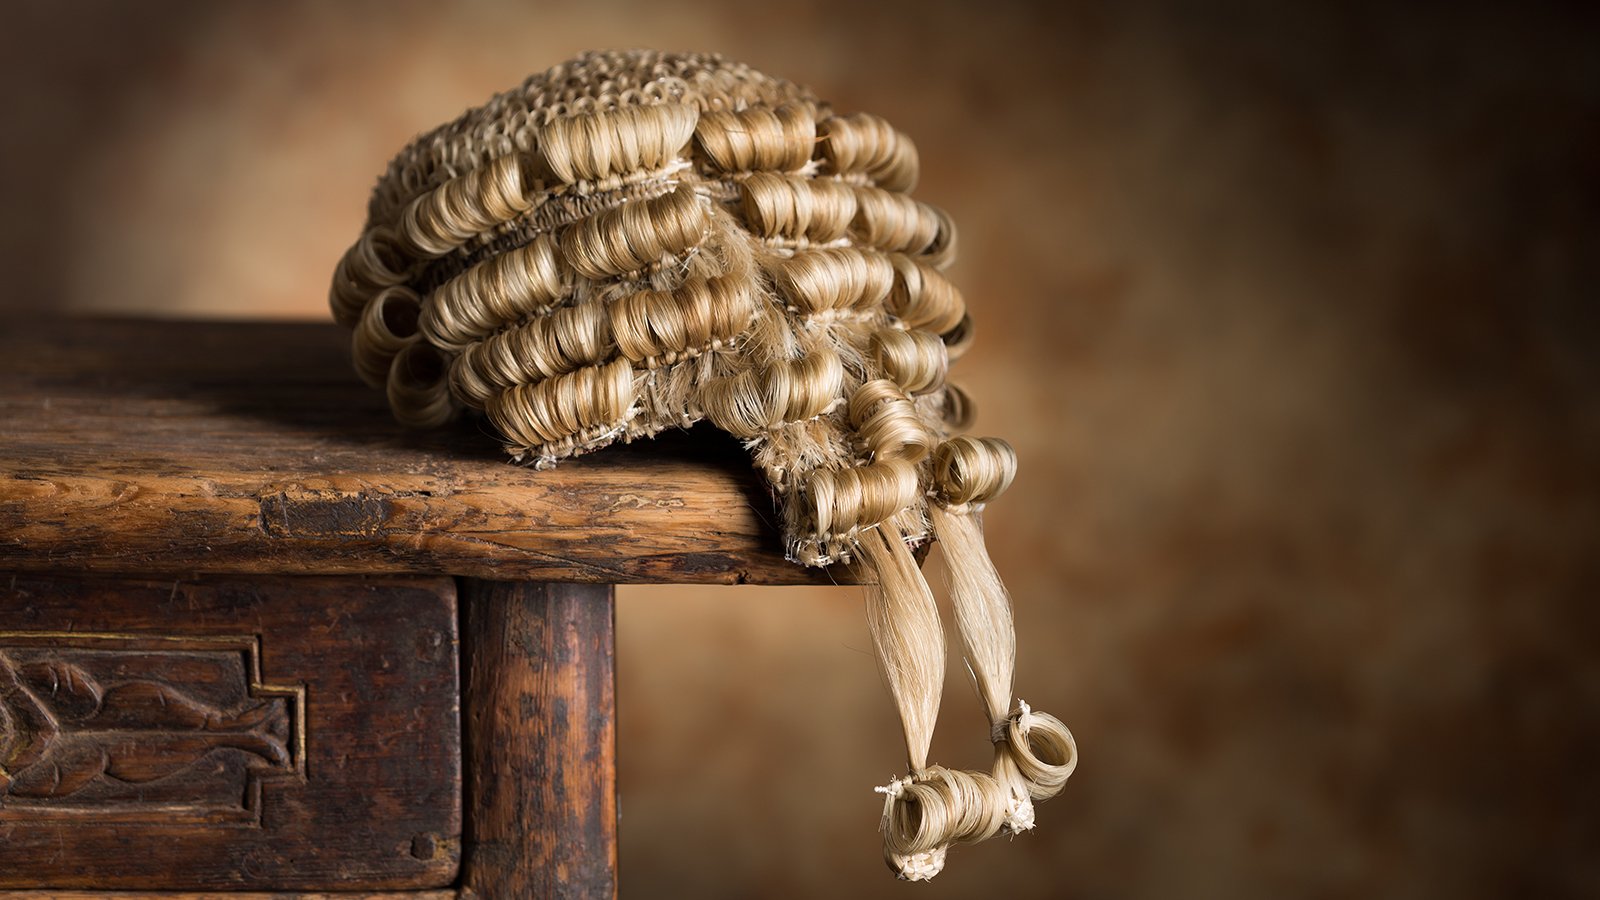 Vegan Barrister Wigs Made From Hemp Could Break '200-Year-Old' Tradition Of Using Horsehair